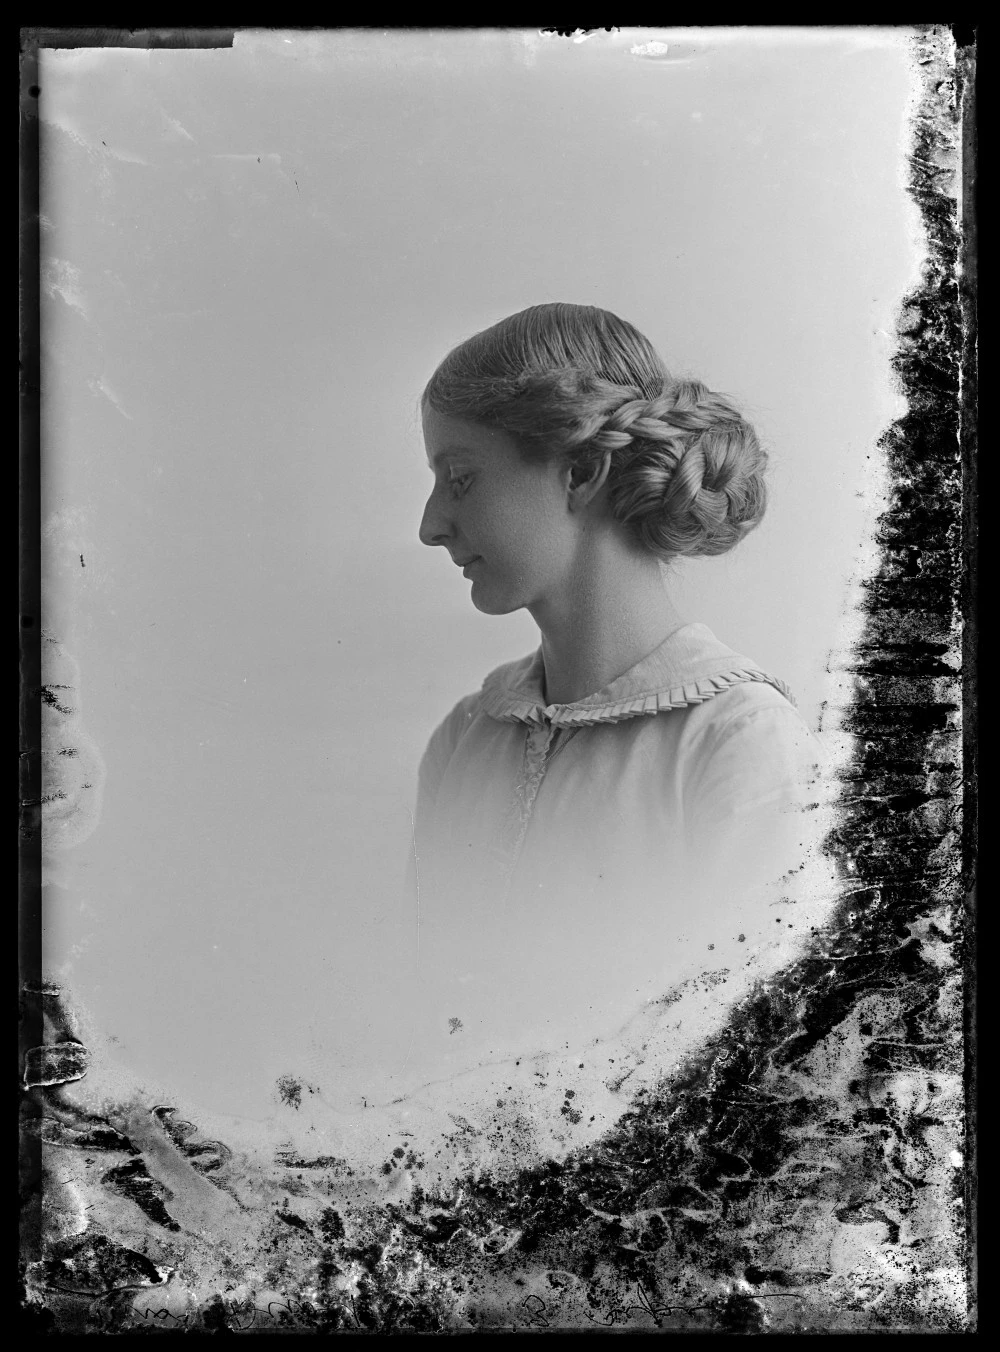 1/4 length profile portrait of Miss Dewith? (Duvith?) wearing her hair plaited.